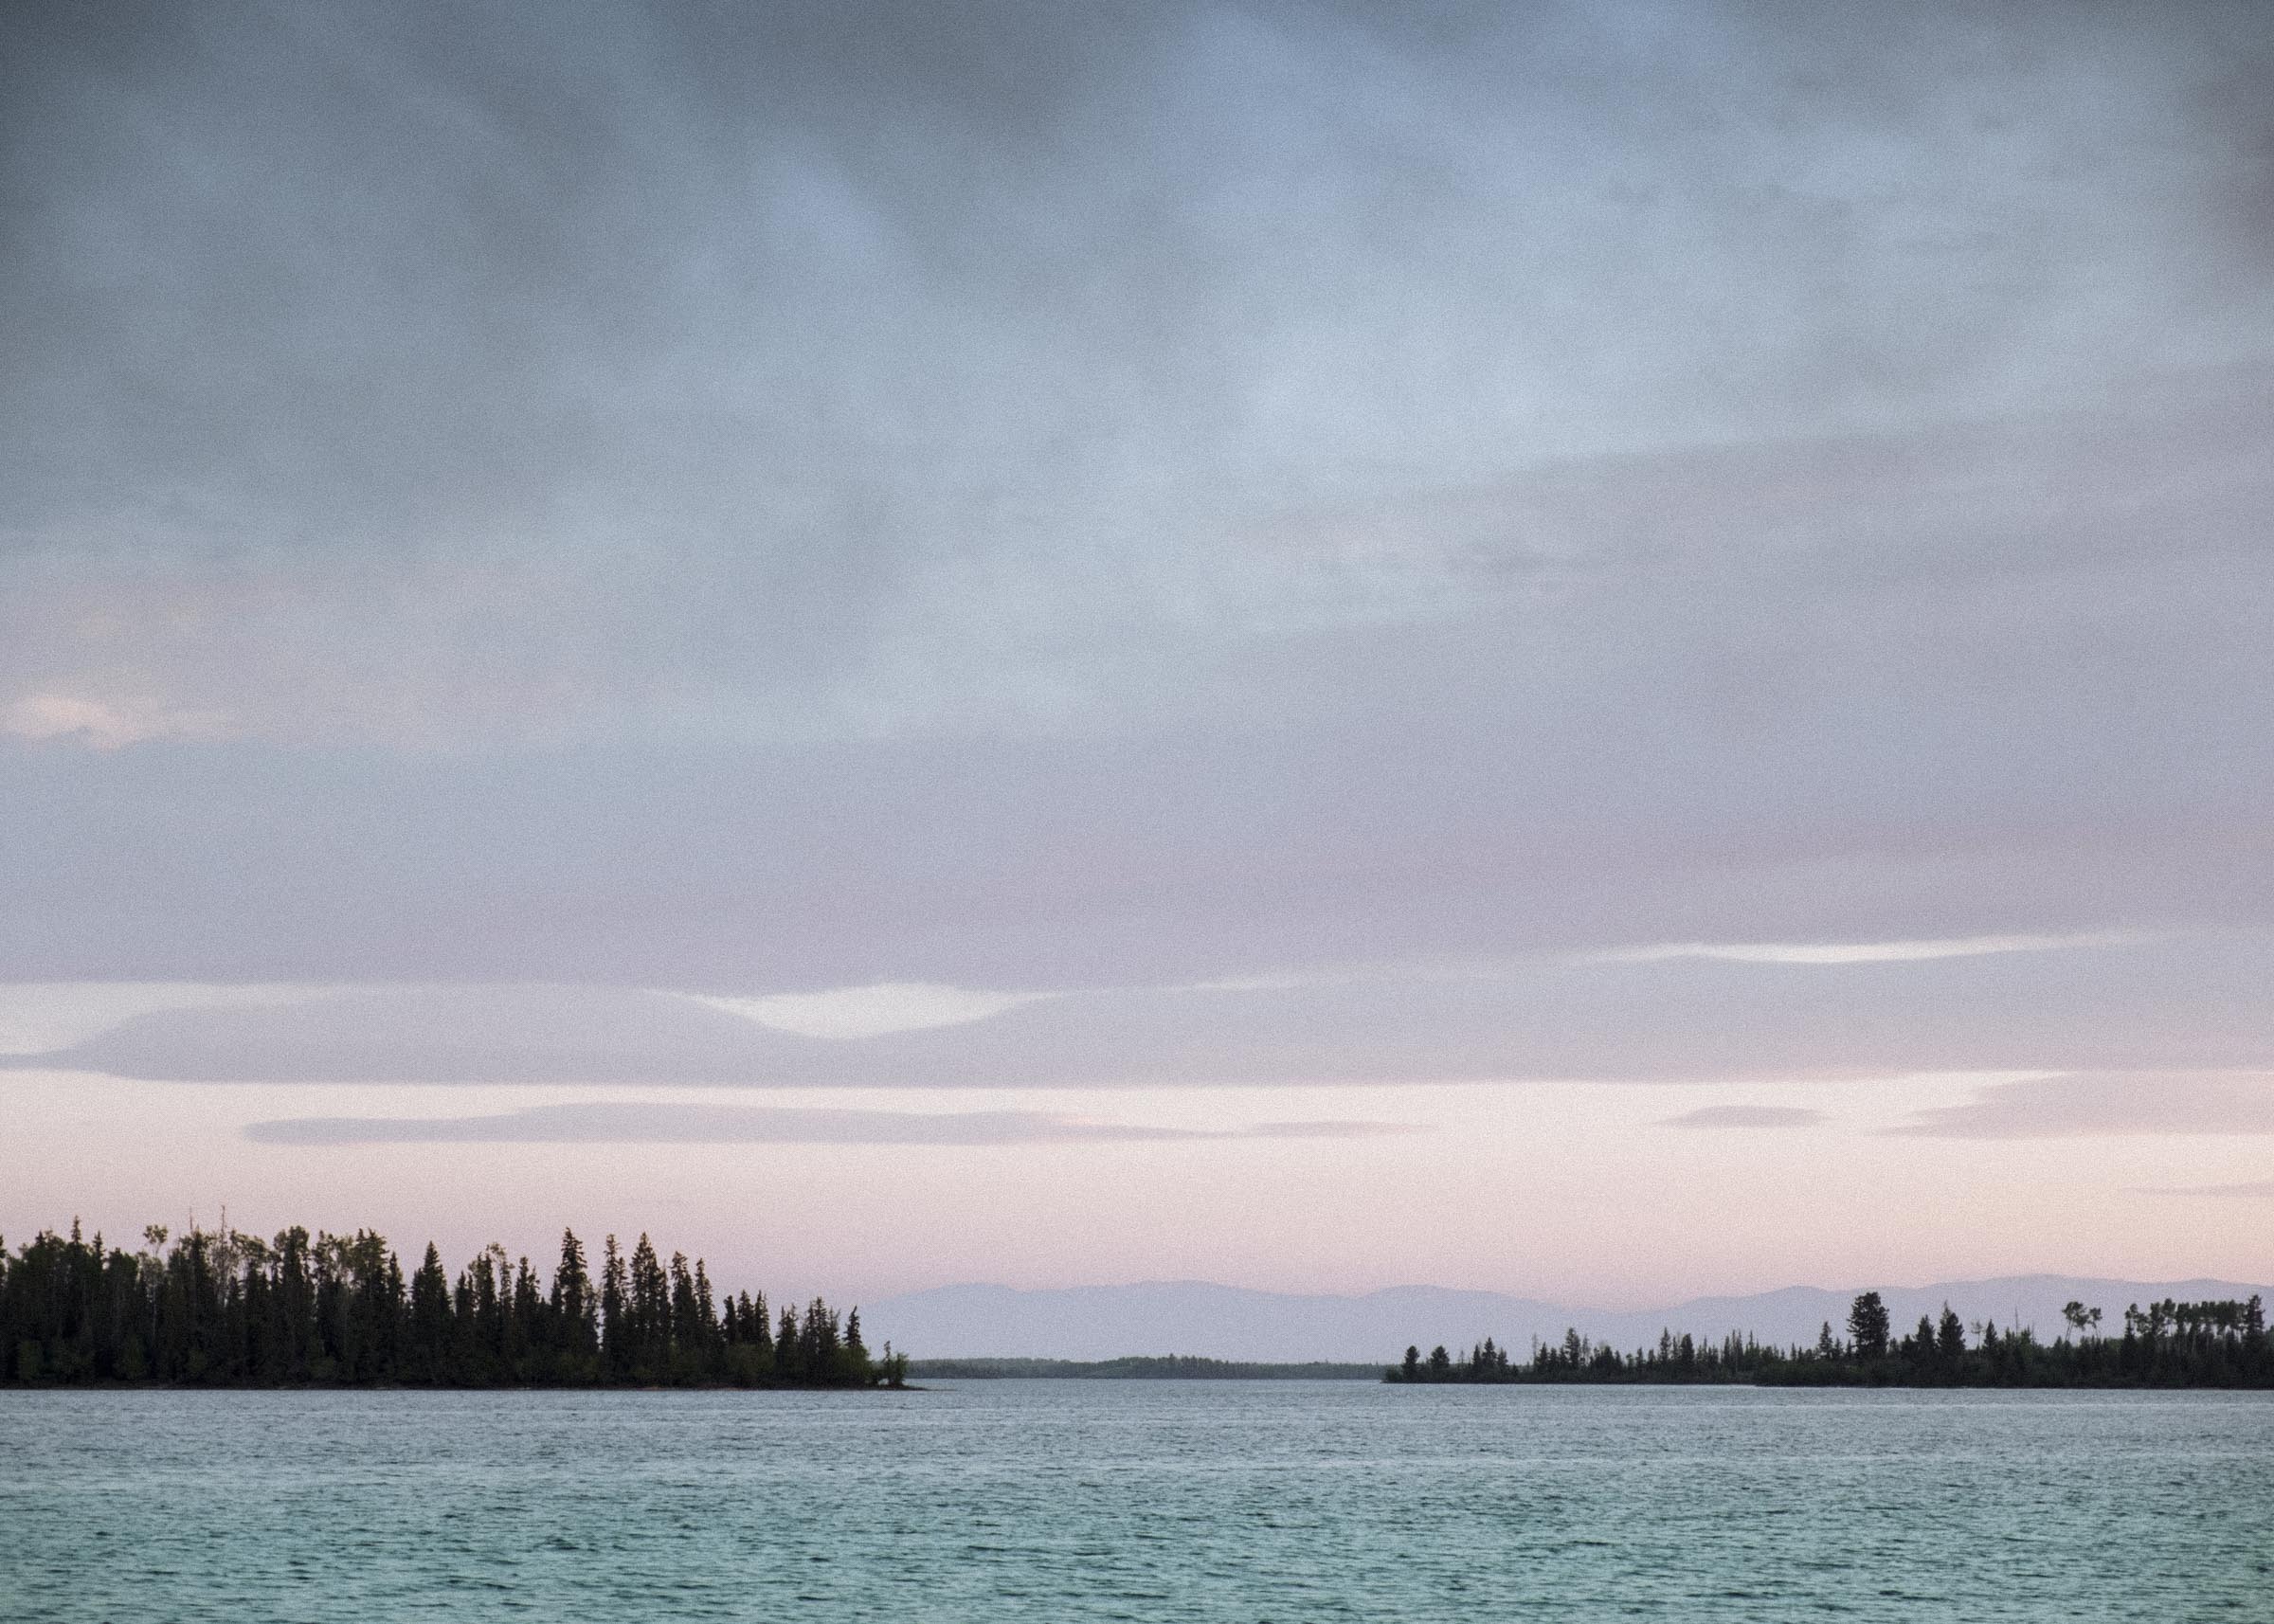 Clouds rolling in on a subtle sunset on Green Lake, BC